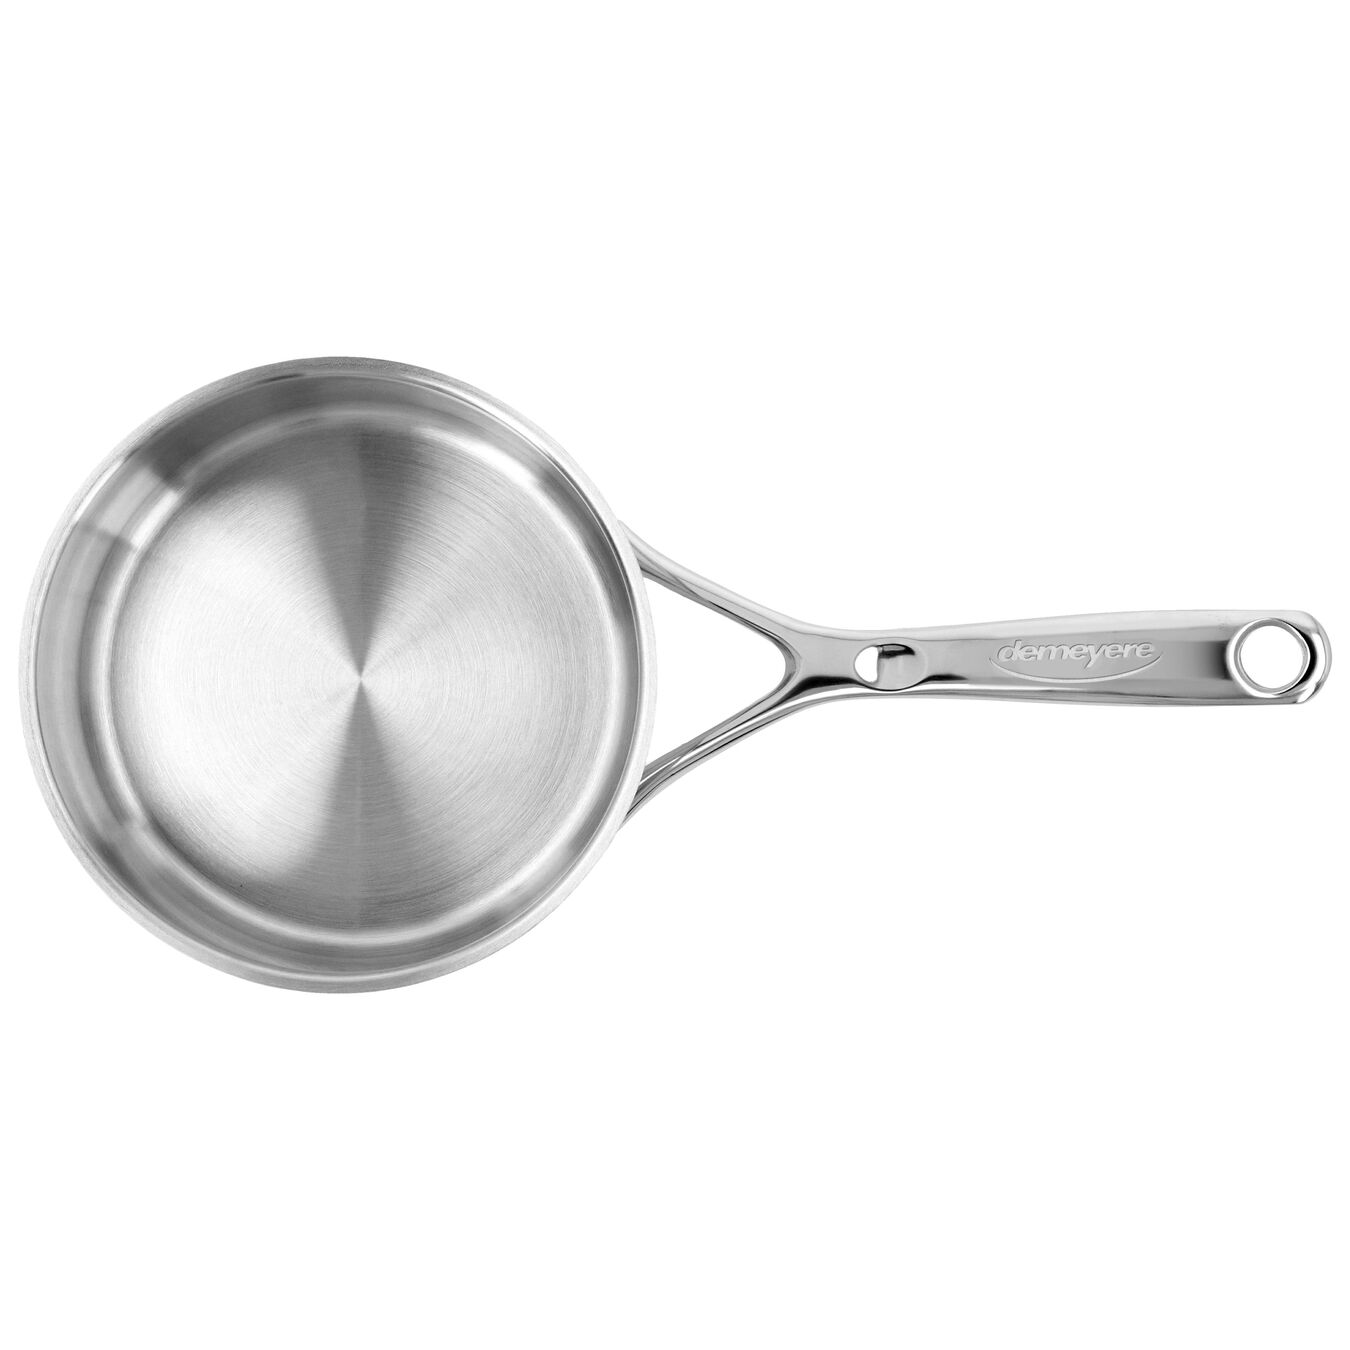 1.5 l 18/10 Stainless Steel round Sauce pan with lid, silver,,large 6